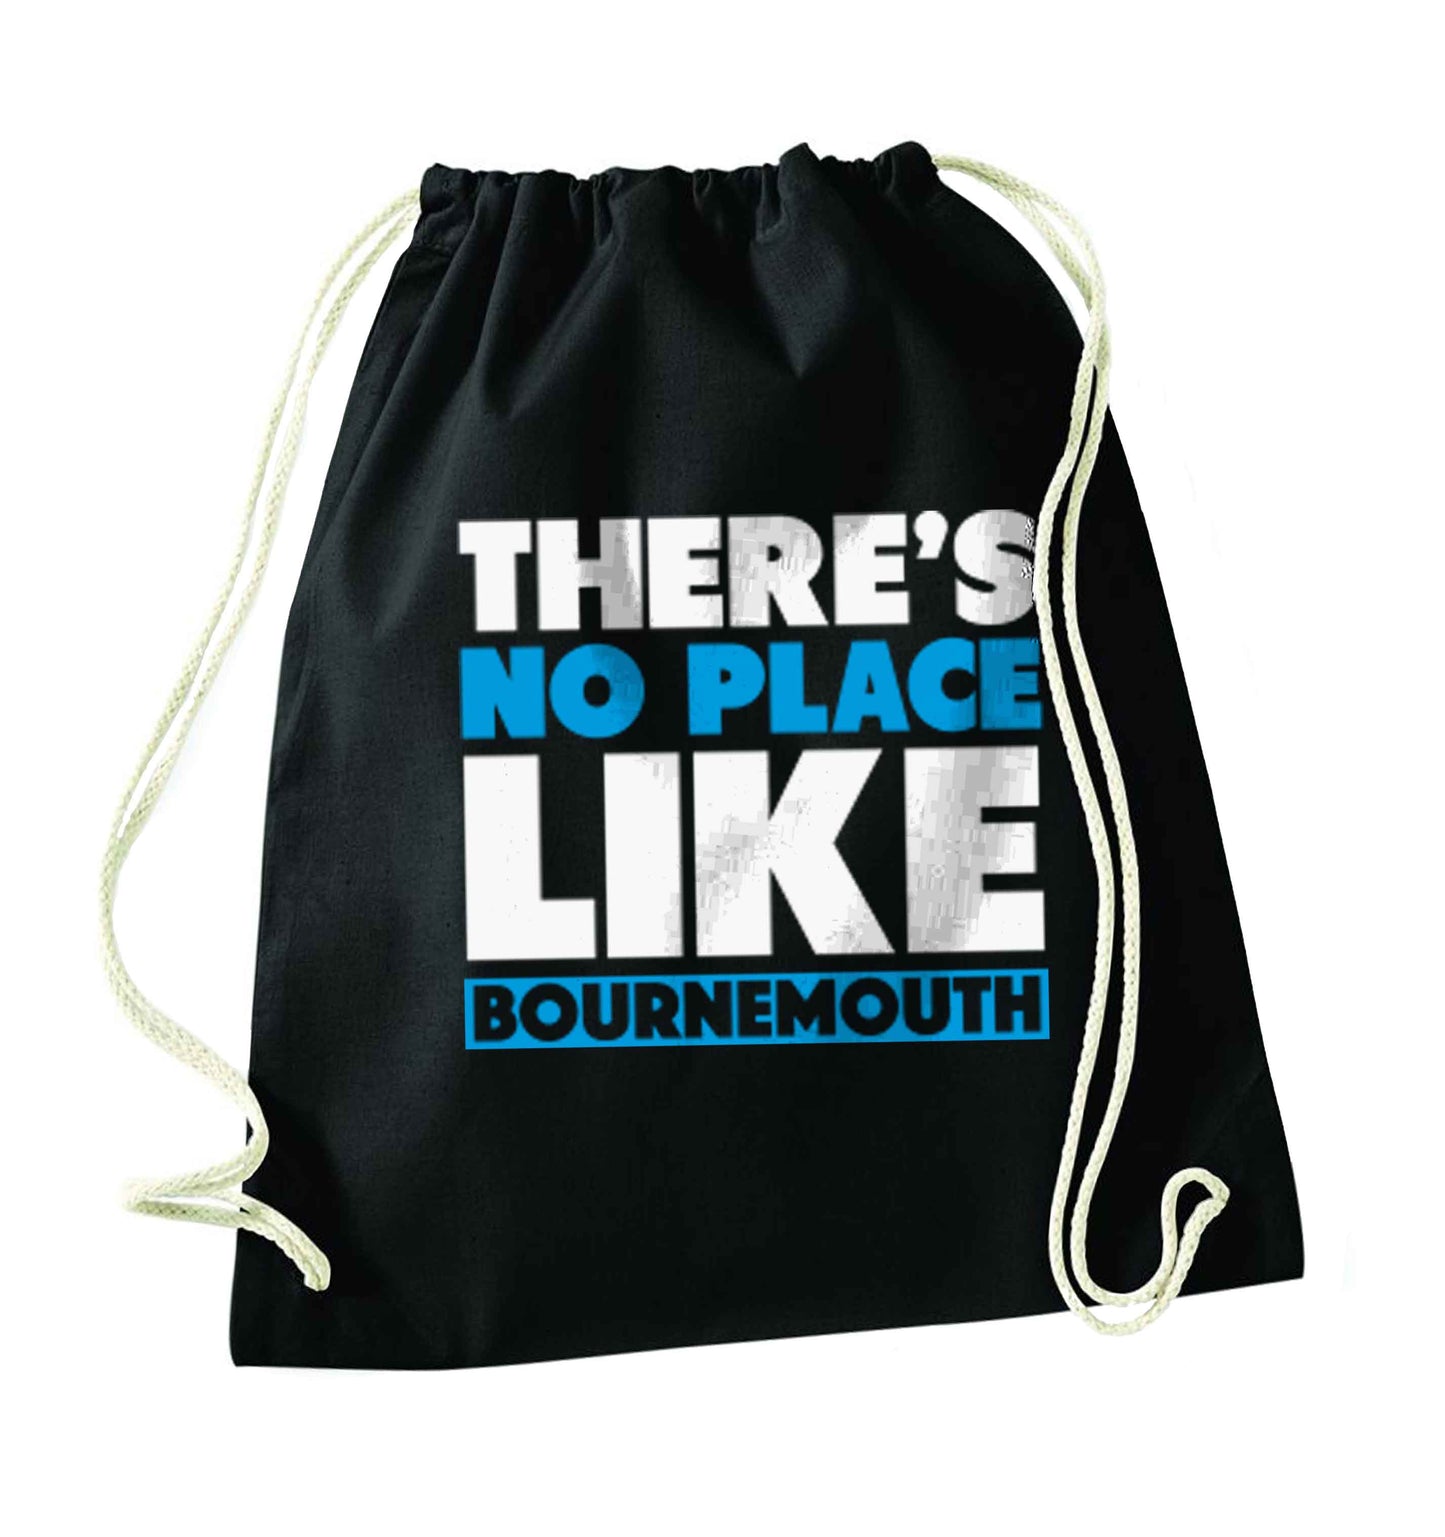 There's no place like Bournemouth black drawstring bag